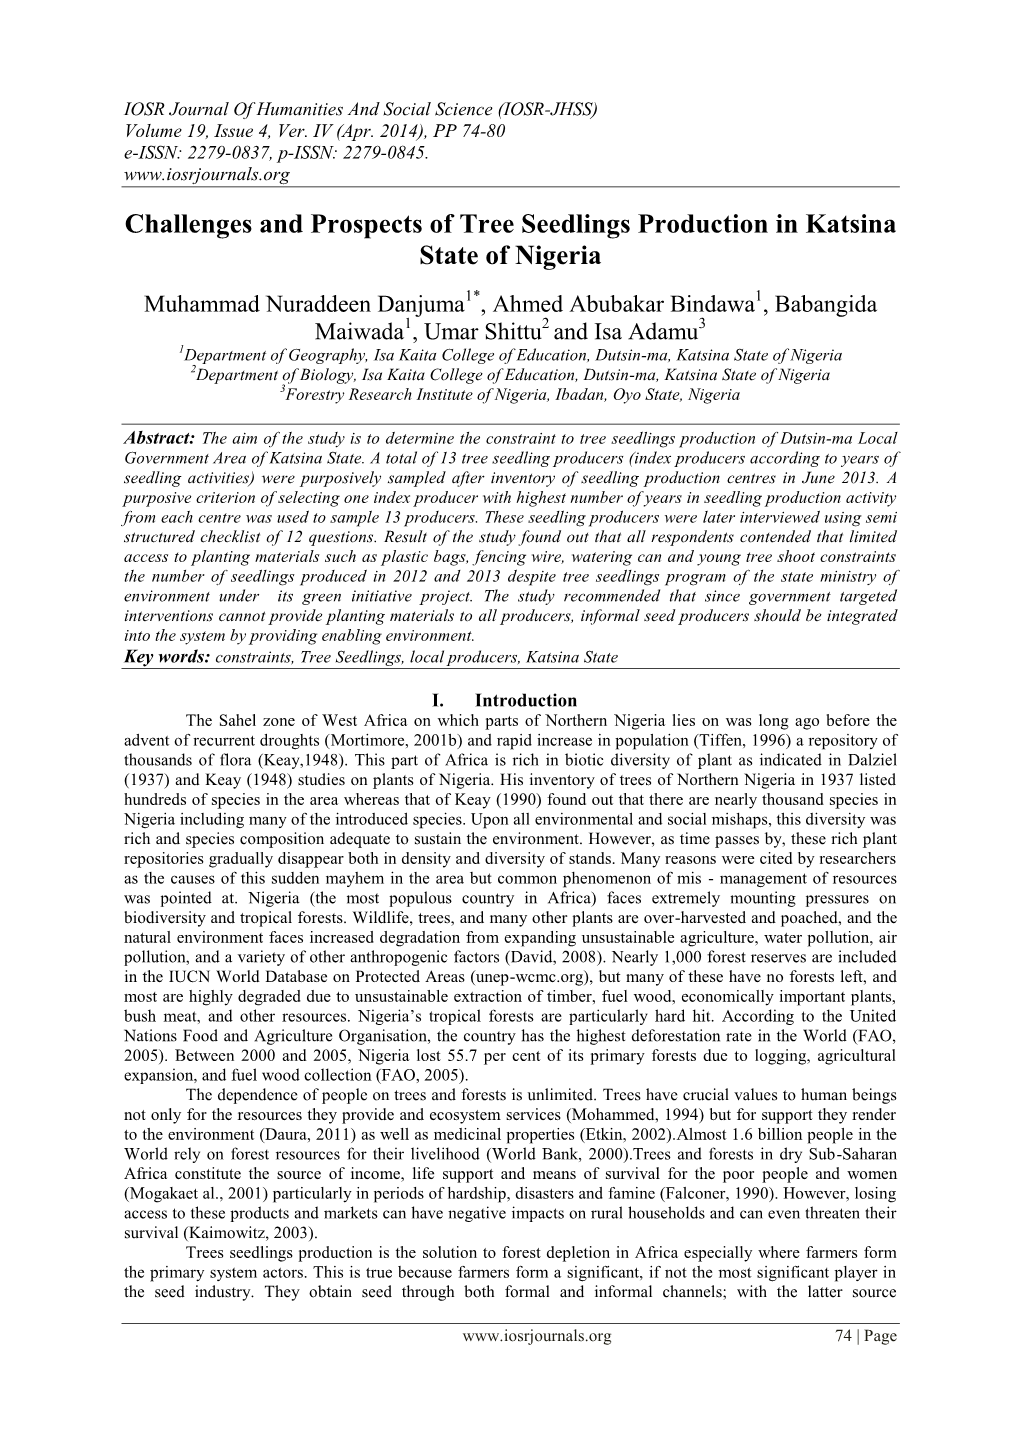 Challenges and Prospects of Tree Seedlings Production in Katsina State of Nigeria